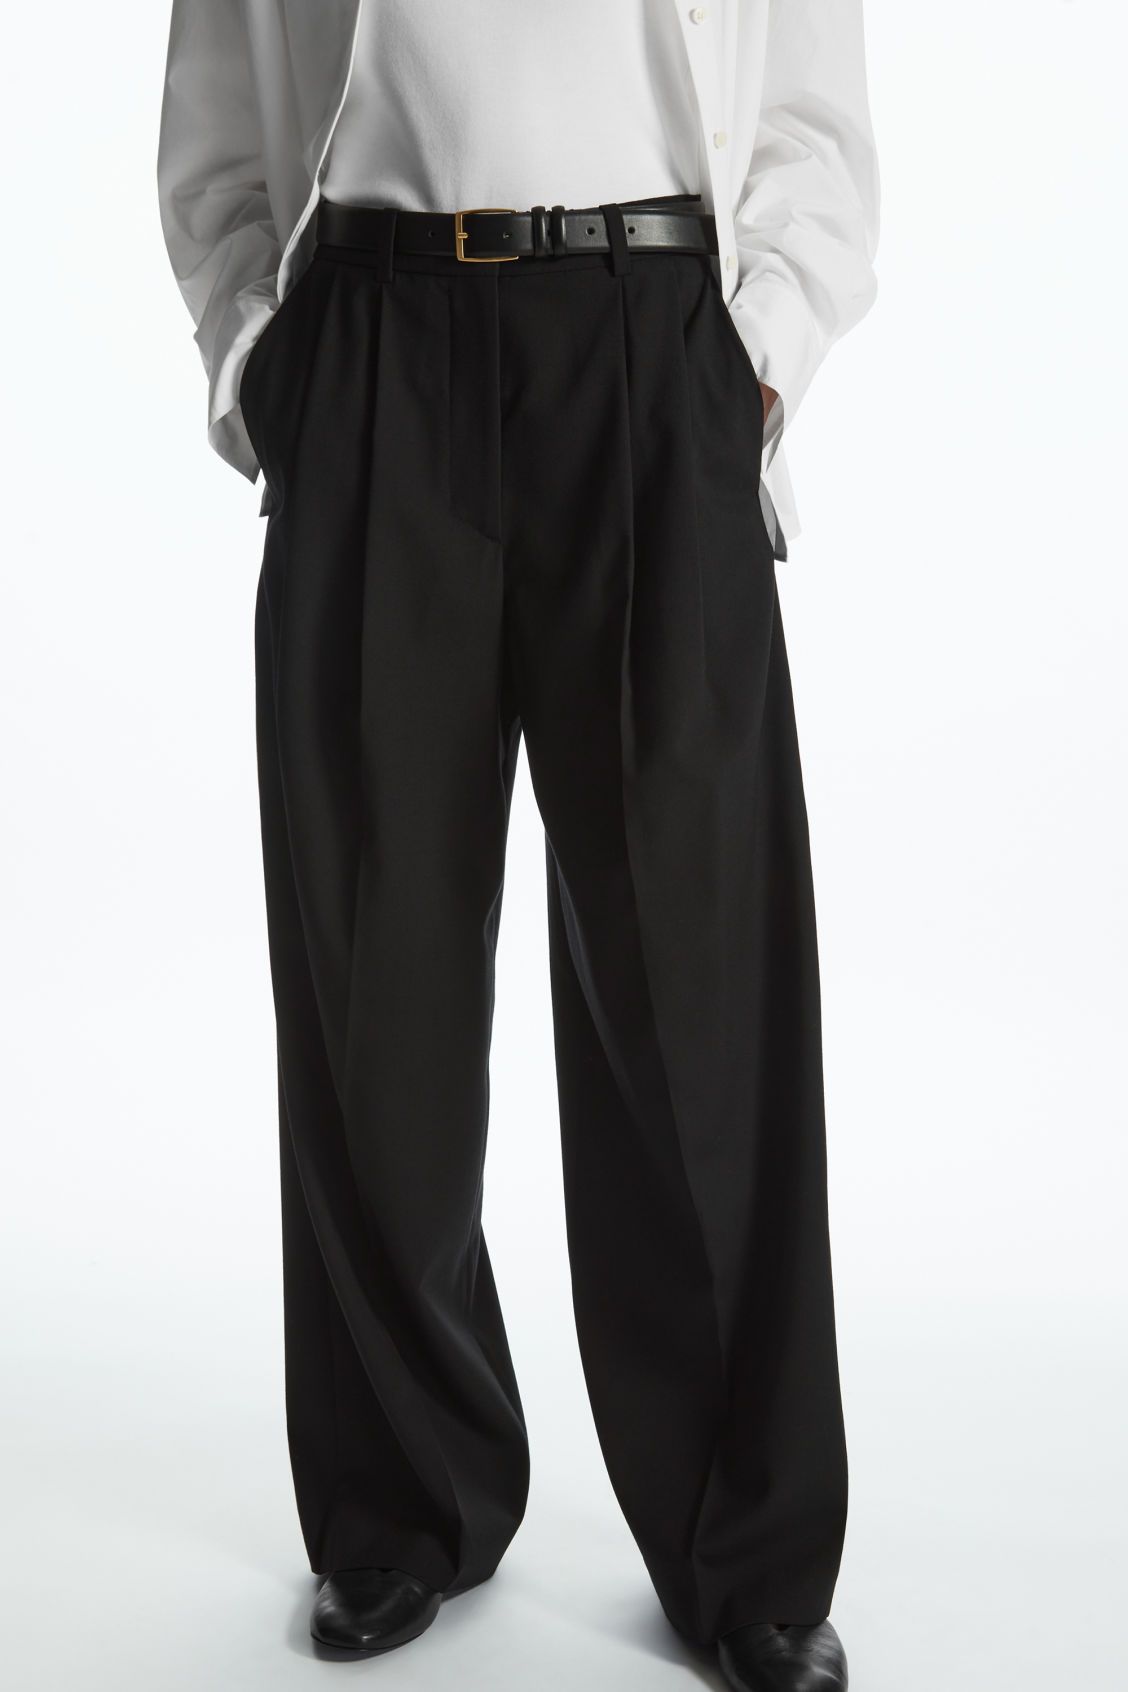 Disrupt Bottoms Pants and Trousers : Buy Disrupt Women Black Side Panelled  Front Slit Smart Pants Online | Nykaa Fashion.